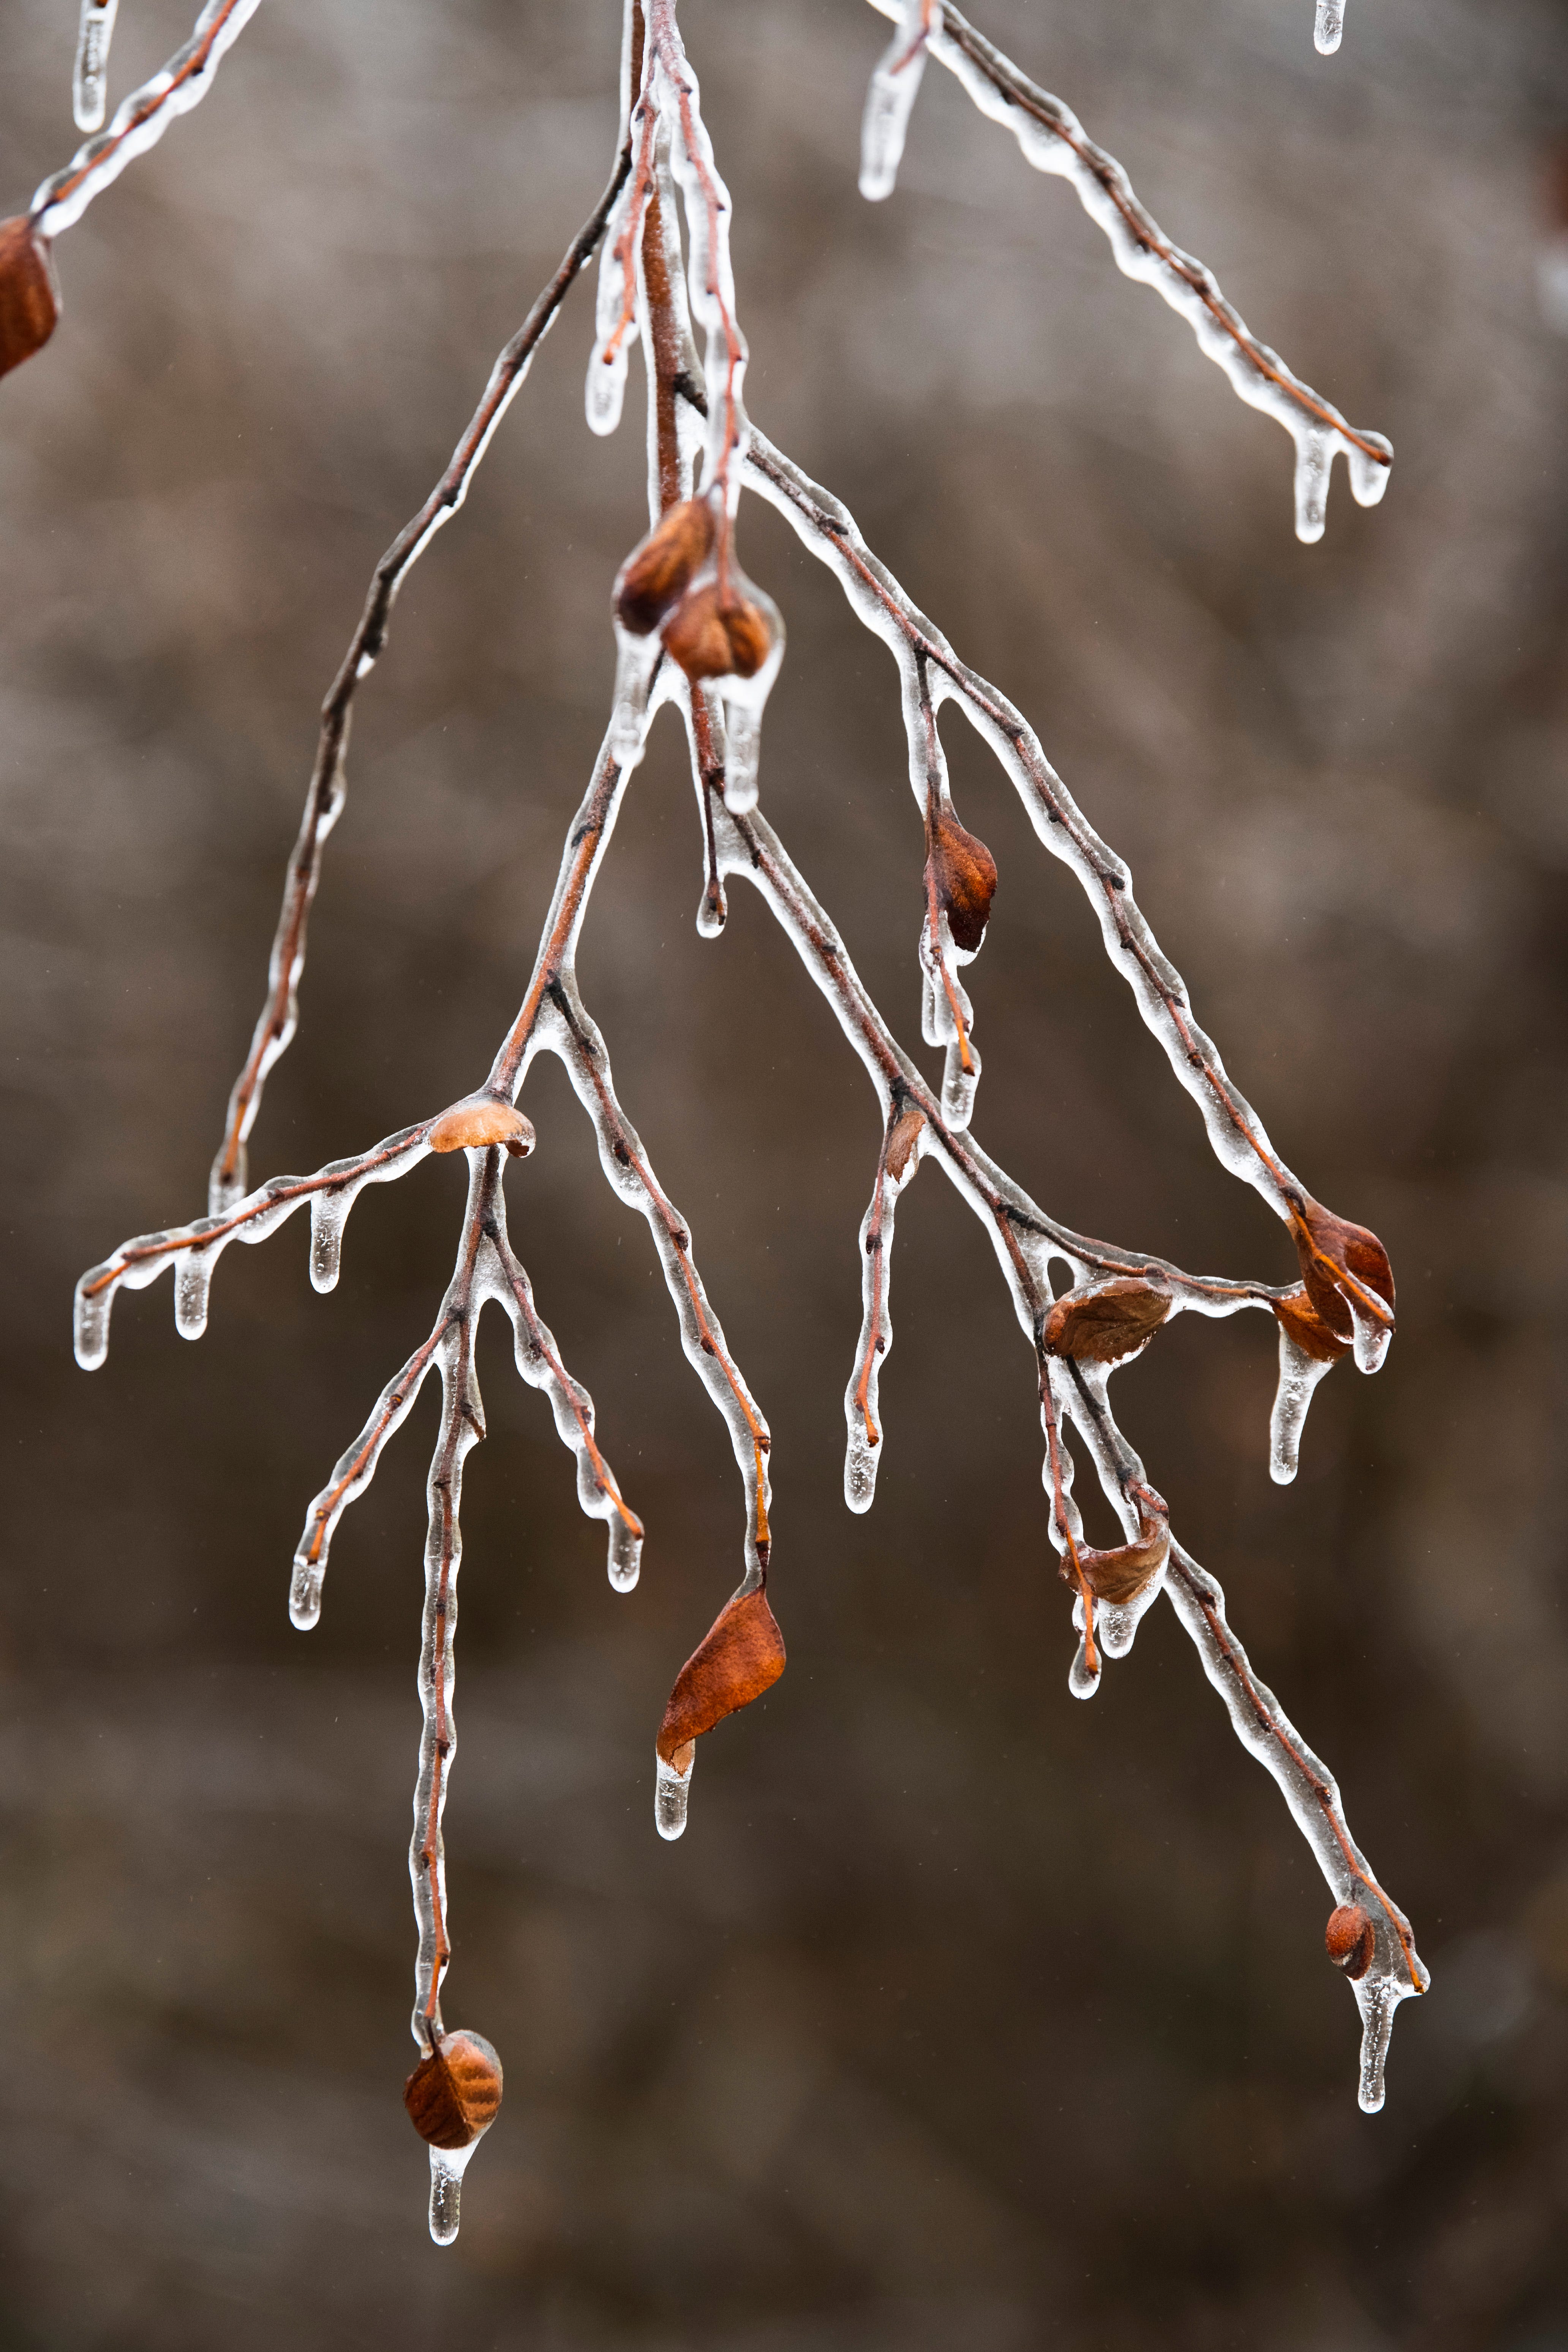 Ice clings to branches in Grosse Pointe Woods on the morning of Thursday, February 23, 2023 after freezing rain coated Metro Detroit communities over night.